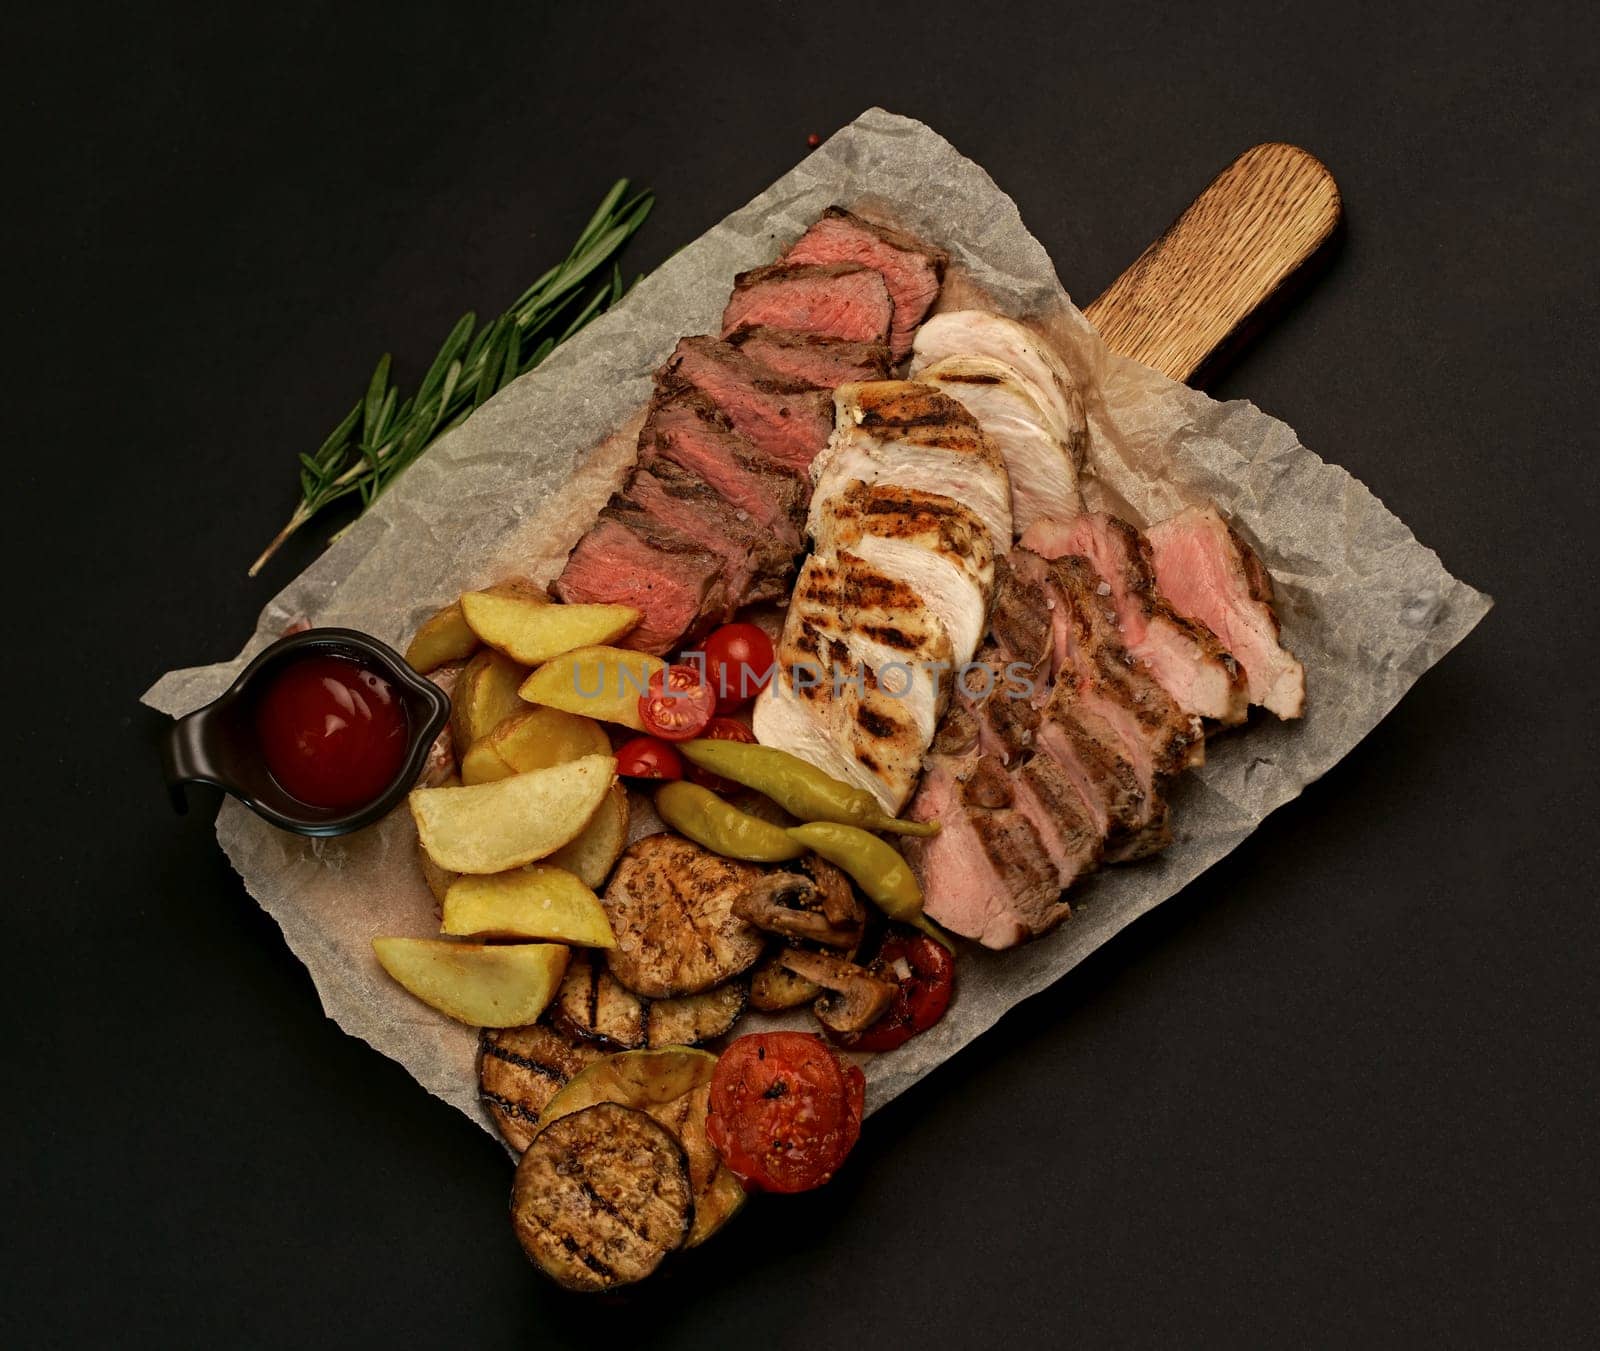 grilled meat. several types of grilled meat cut on a wooden board by aprilphoto